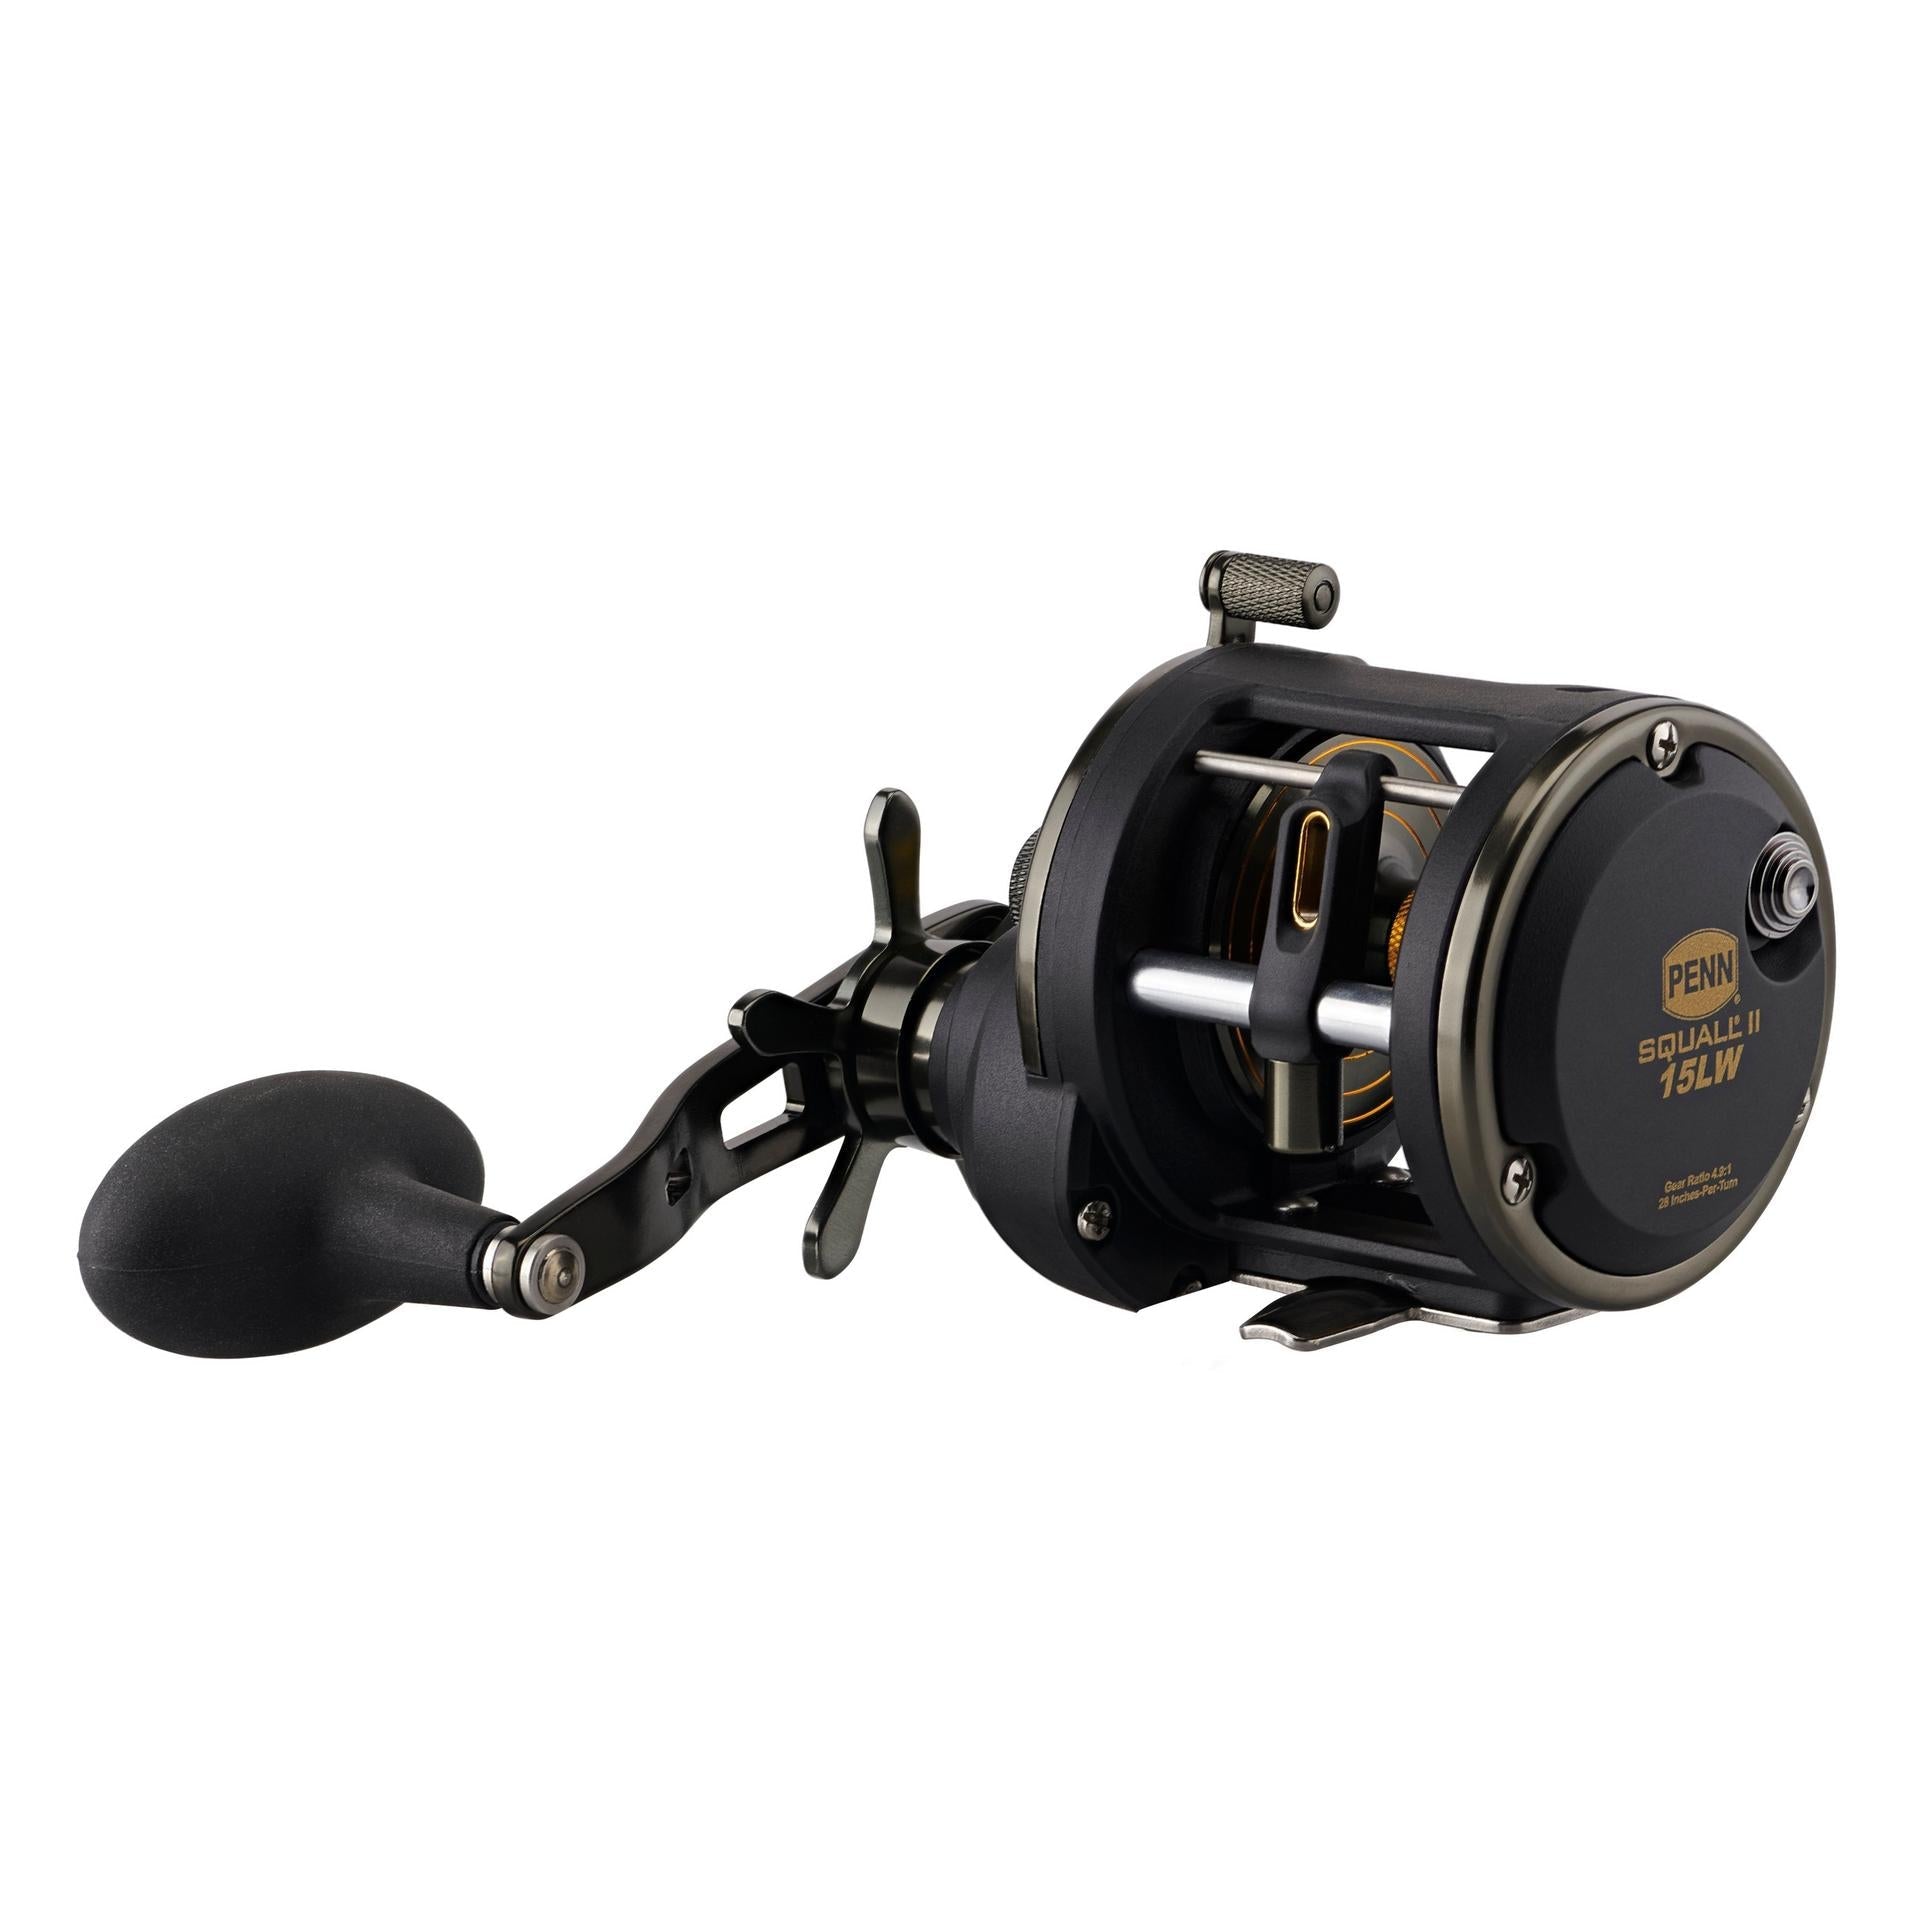 Penn Squall 15 saltwater fishing reel how to take apart and service 